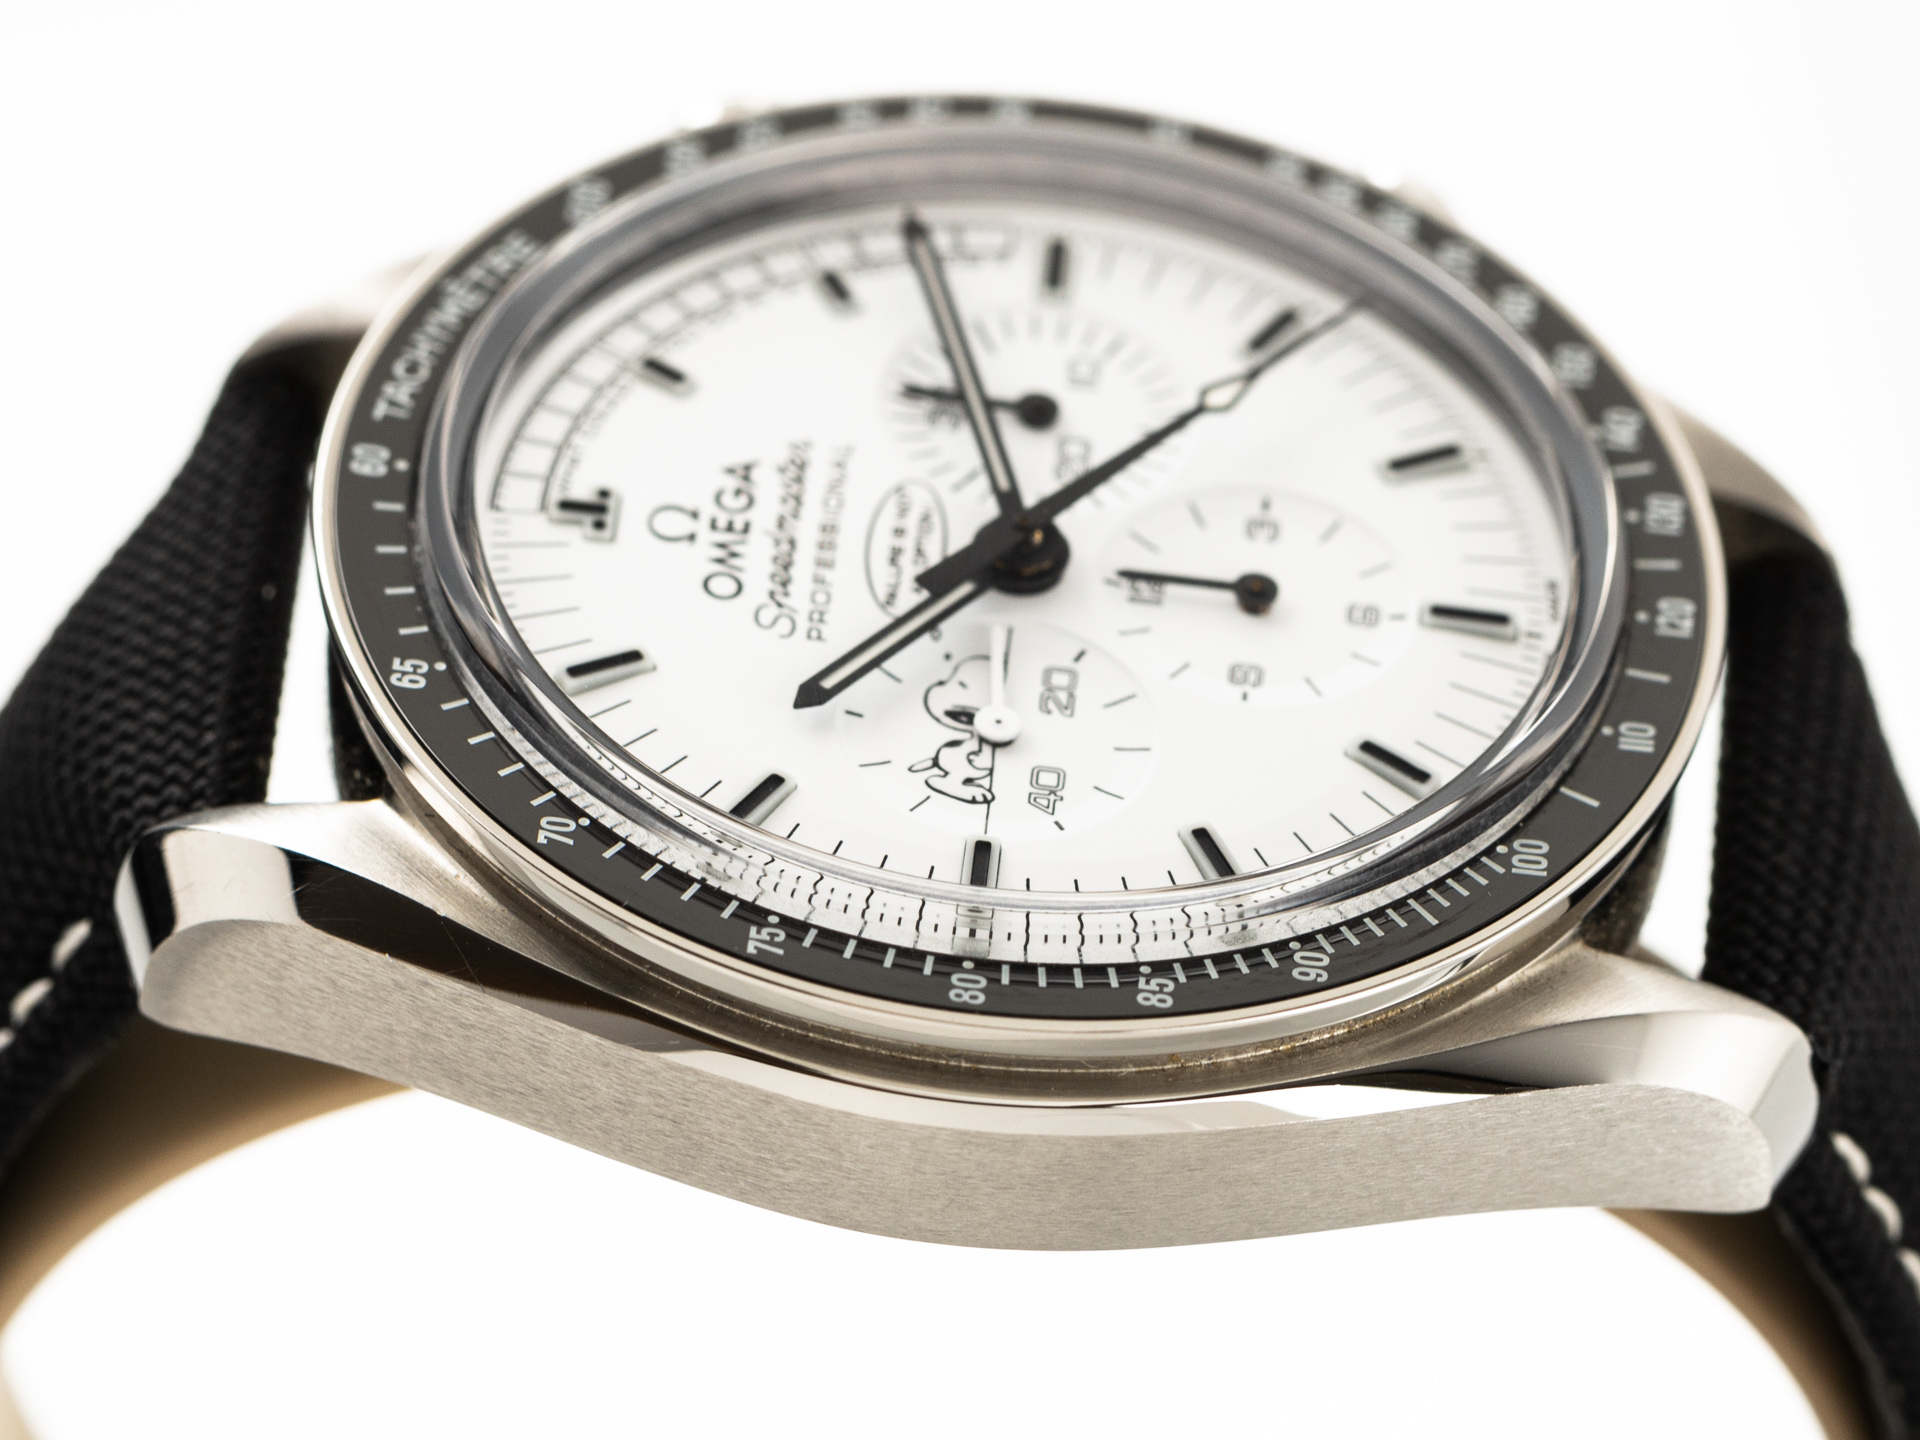 Omega Speedmaster Professional Silver Snoopy Anthology: I Review All Three  Moonwatch Models 